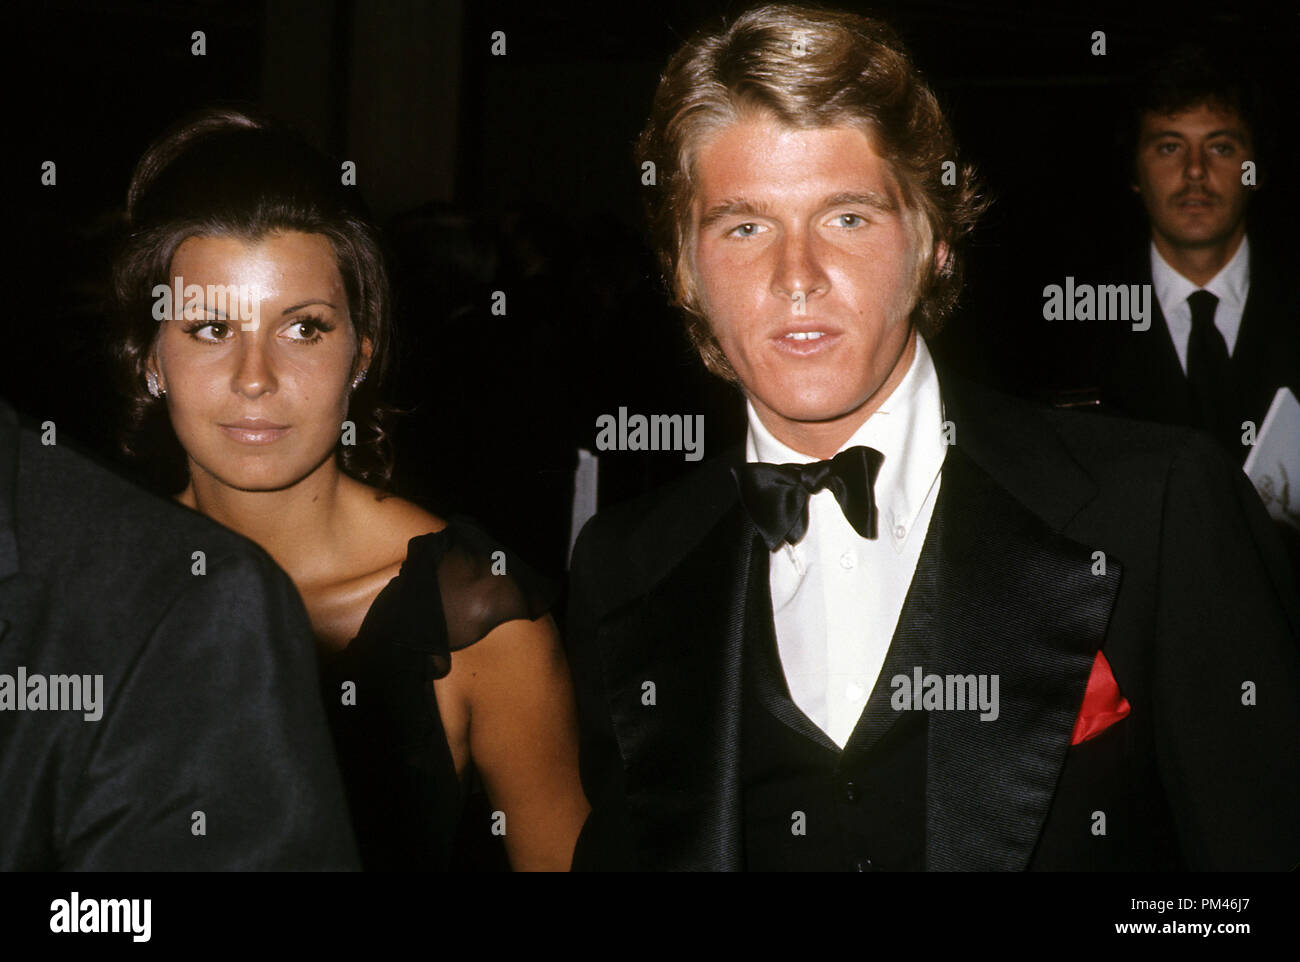 Tina Sinatra with Dean Paul Martin at the Emmy Awards,1970. File Reference #1074 001THA © JRC /The Hollywood Archive - All Rights Reserved. Stock Photo